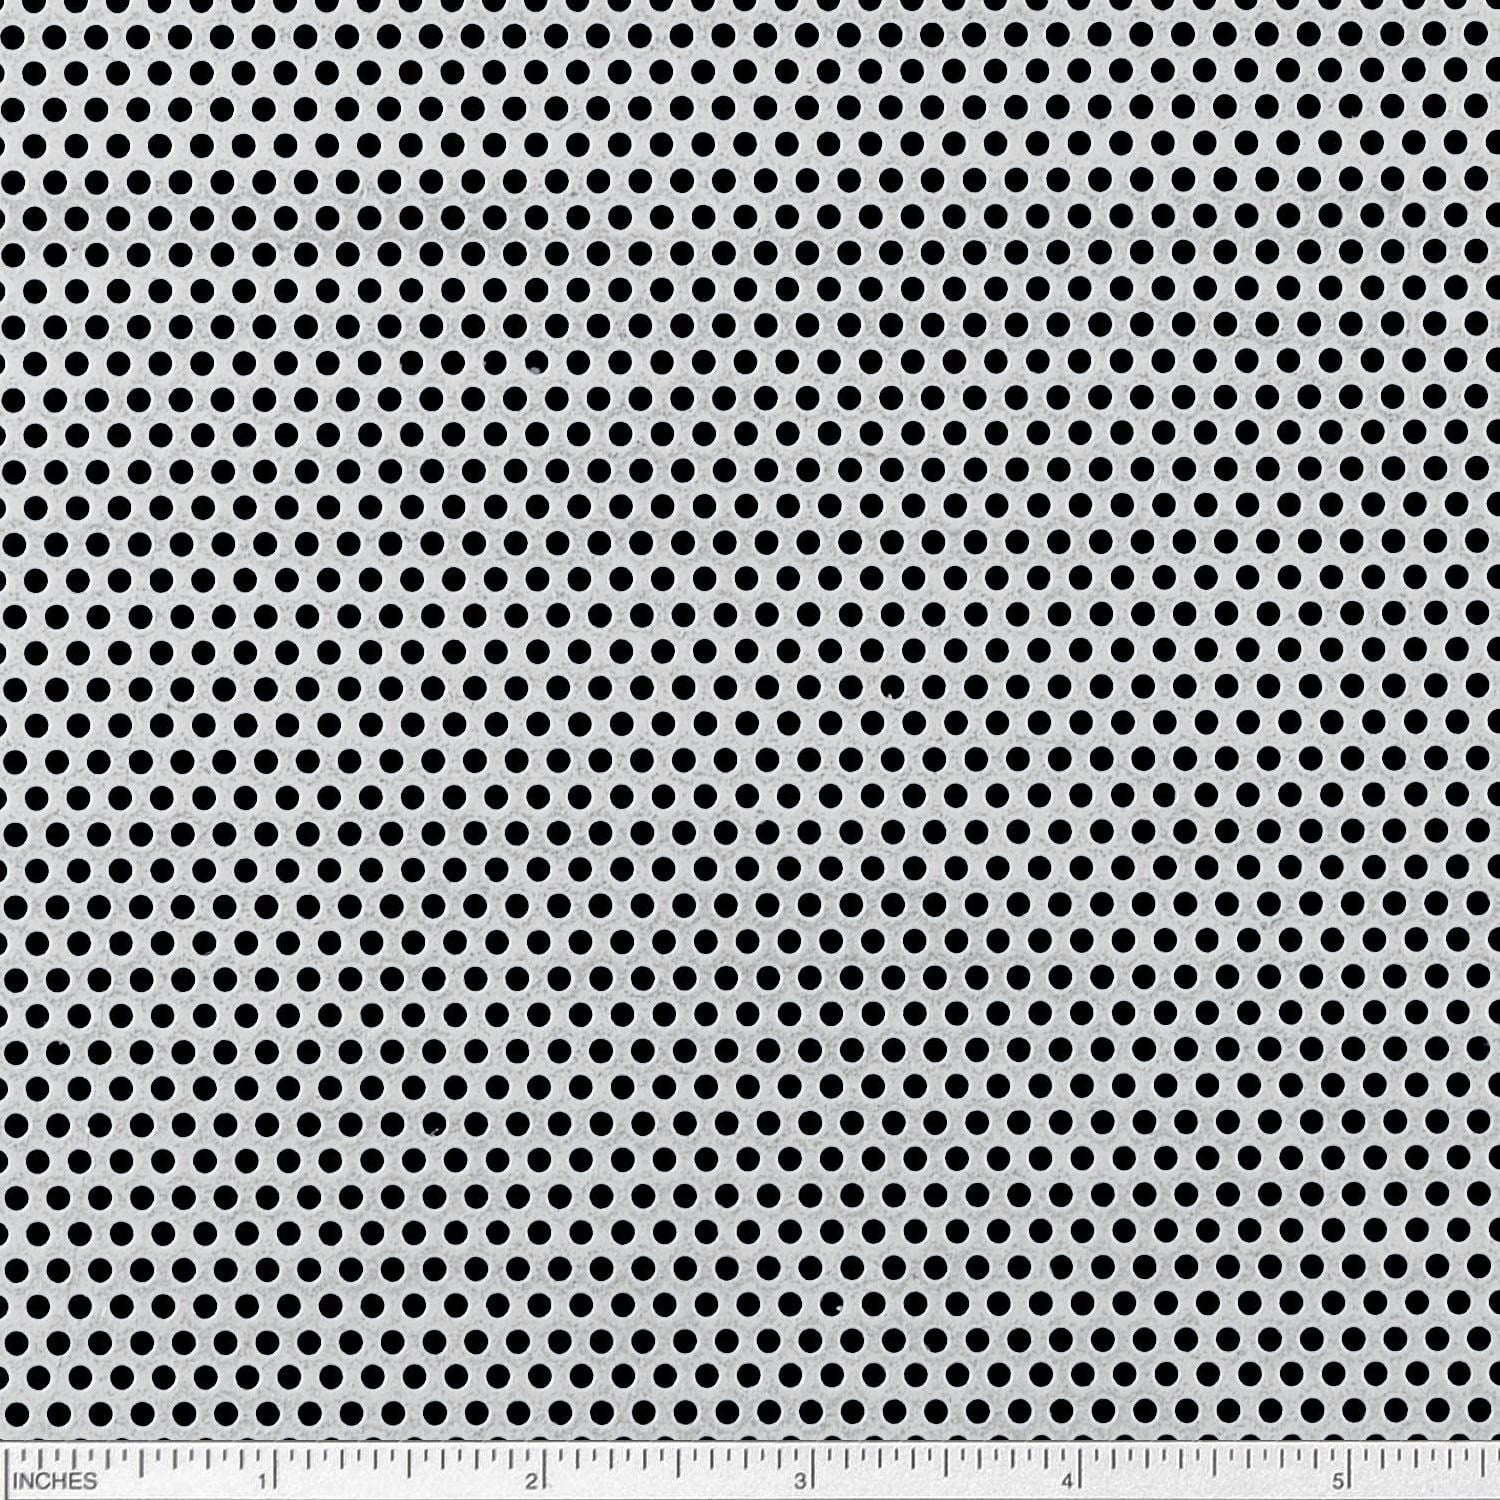 1/4" Perfs 5/16" Staggered Centers Perforated Steel Sheet 20g x 12" x 48" 